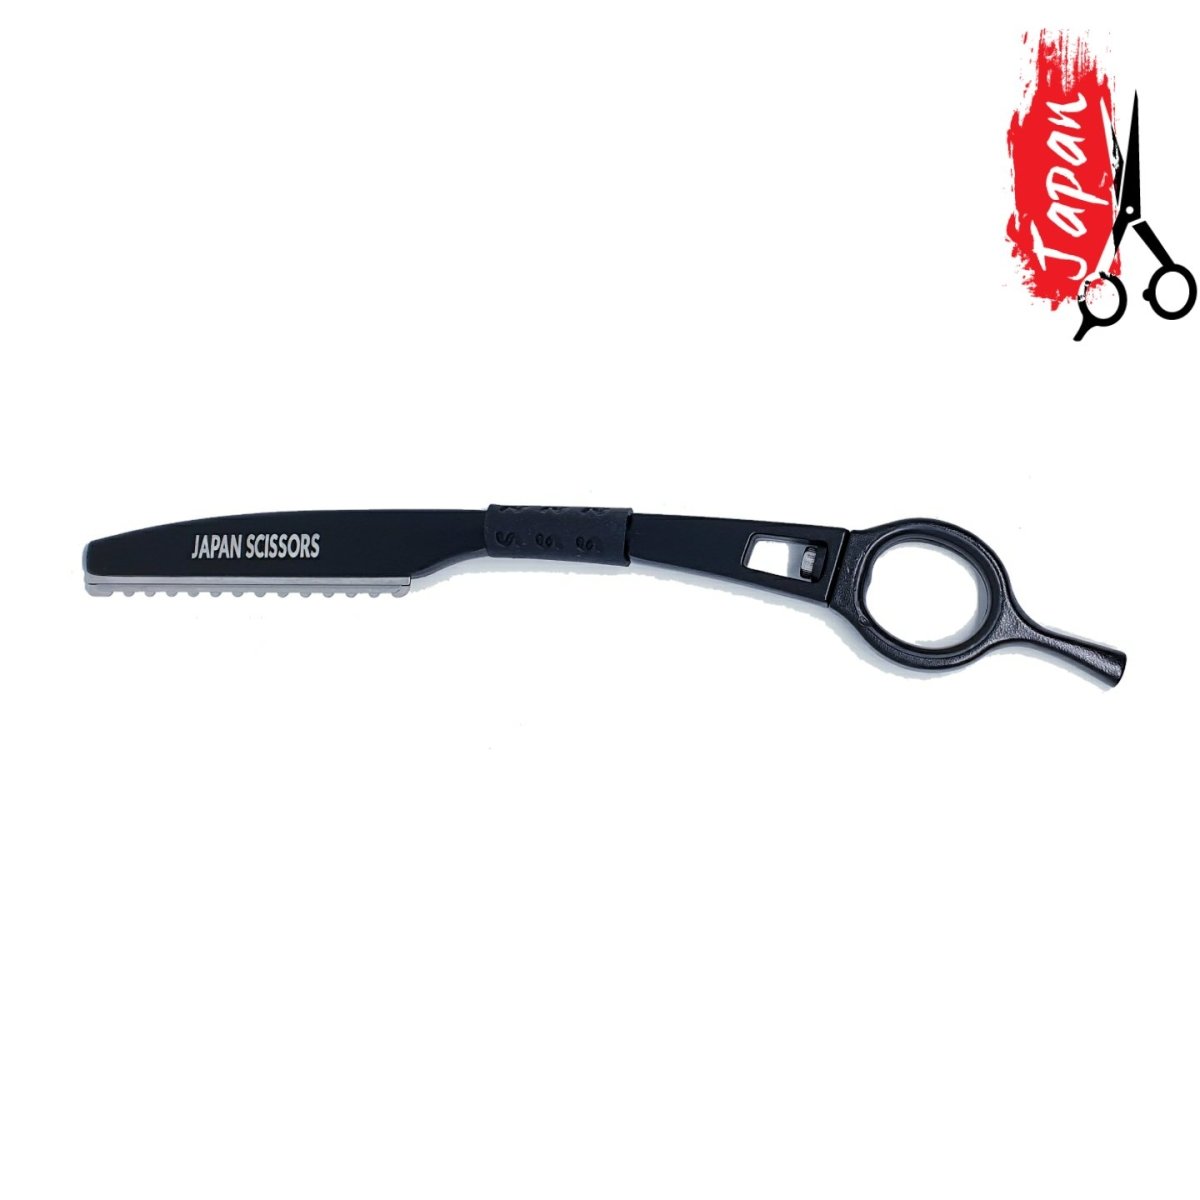 JP Texturizing & Feather Styling Razor For Hairstyling & Volume - Japan Scissors USA